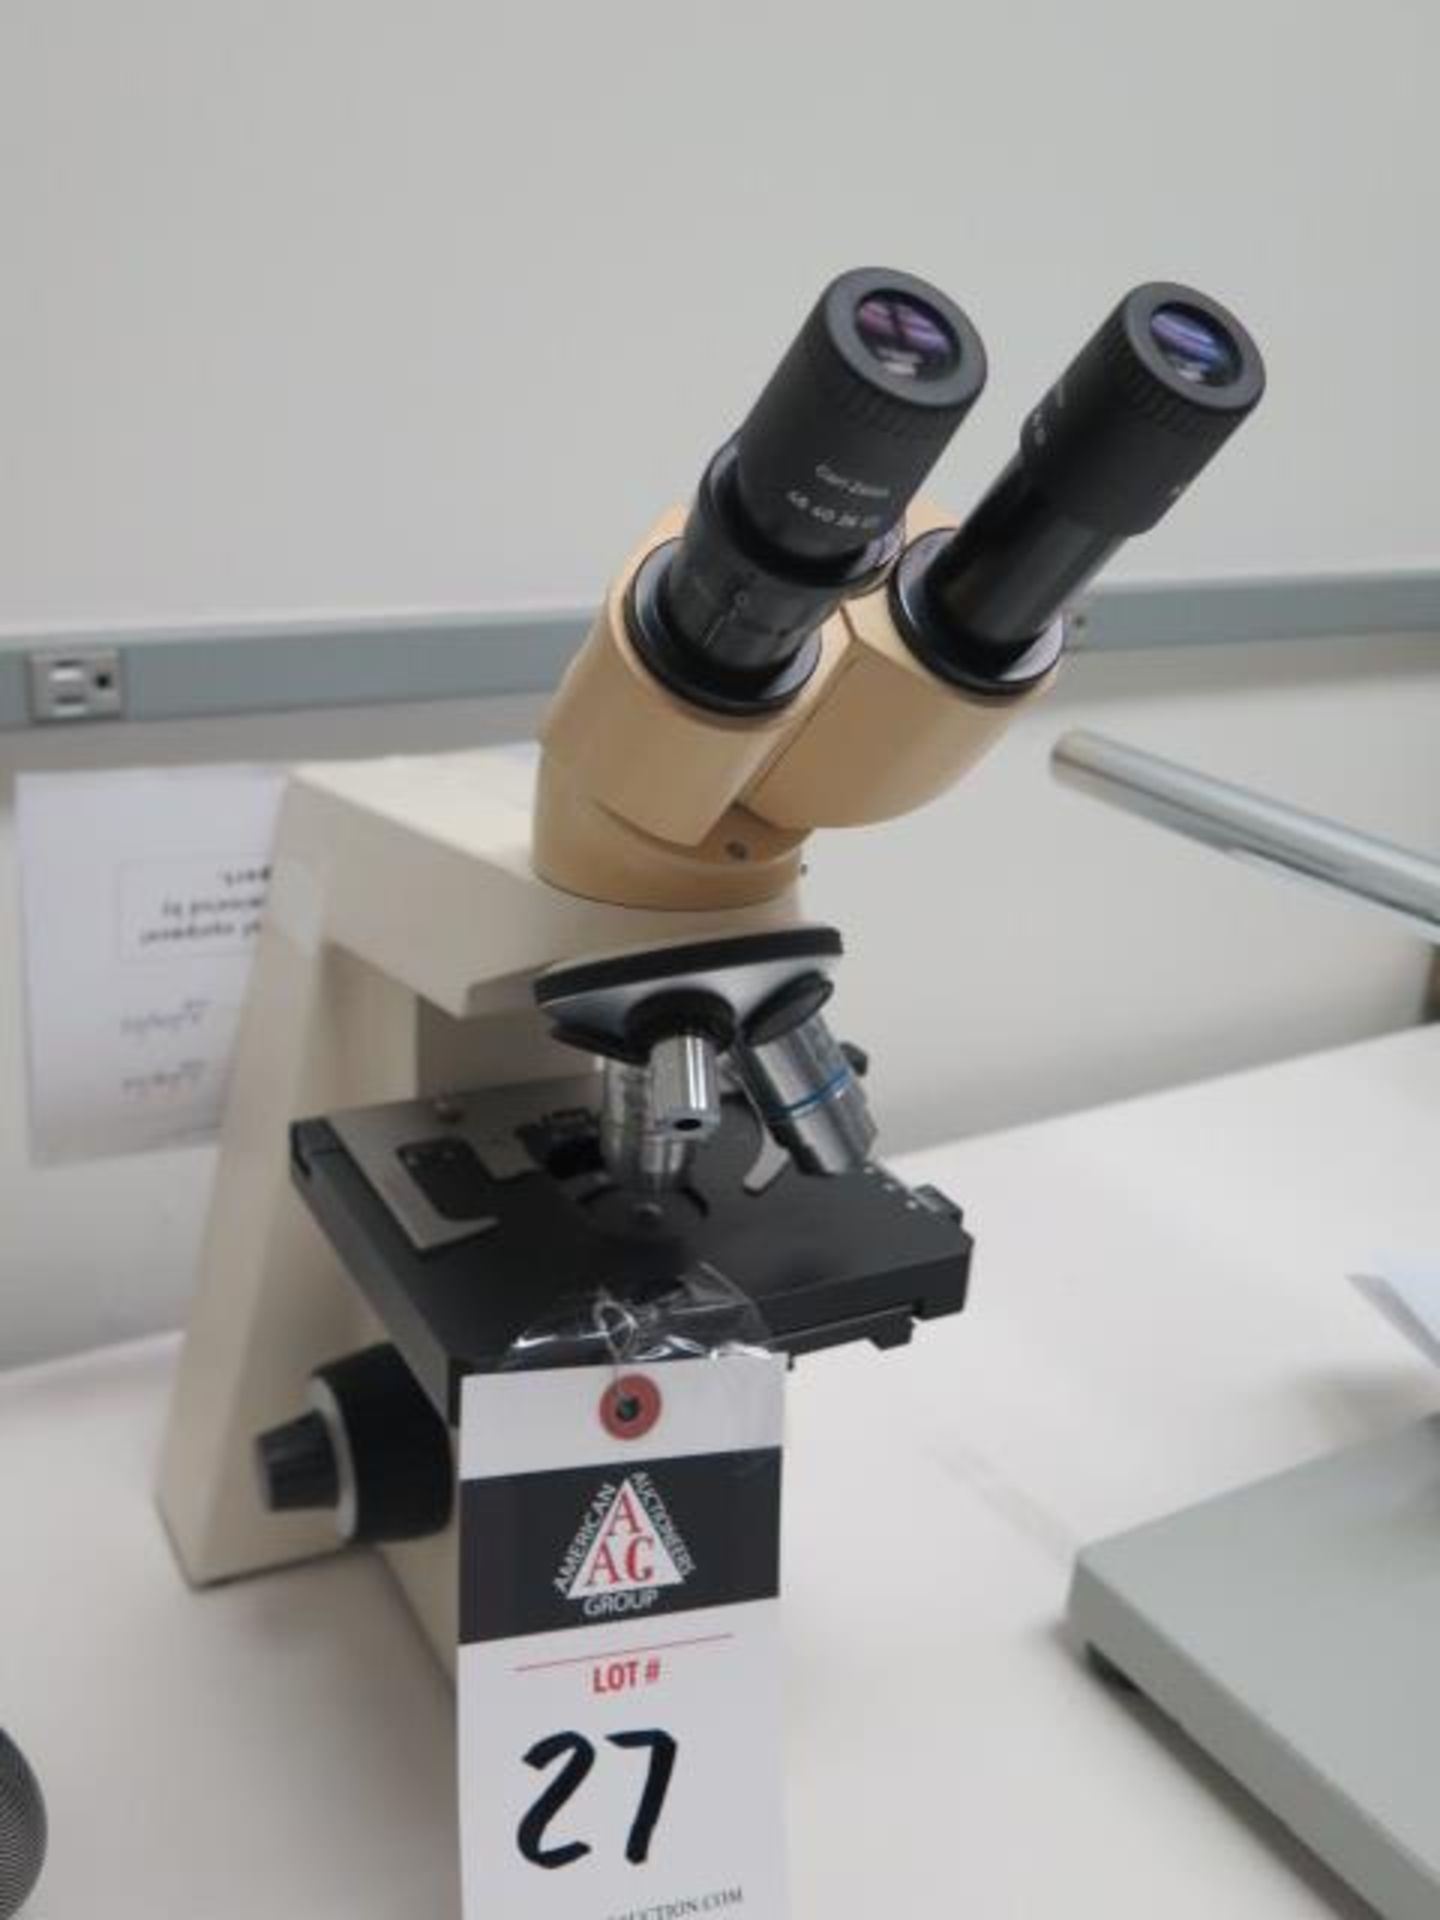 Zeiss “Standard 20” Stereo Microscope w/ 3-Objectives and Light Source (SOLD AS-IS - NO WARRANTY) - Image 3 of 9